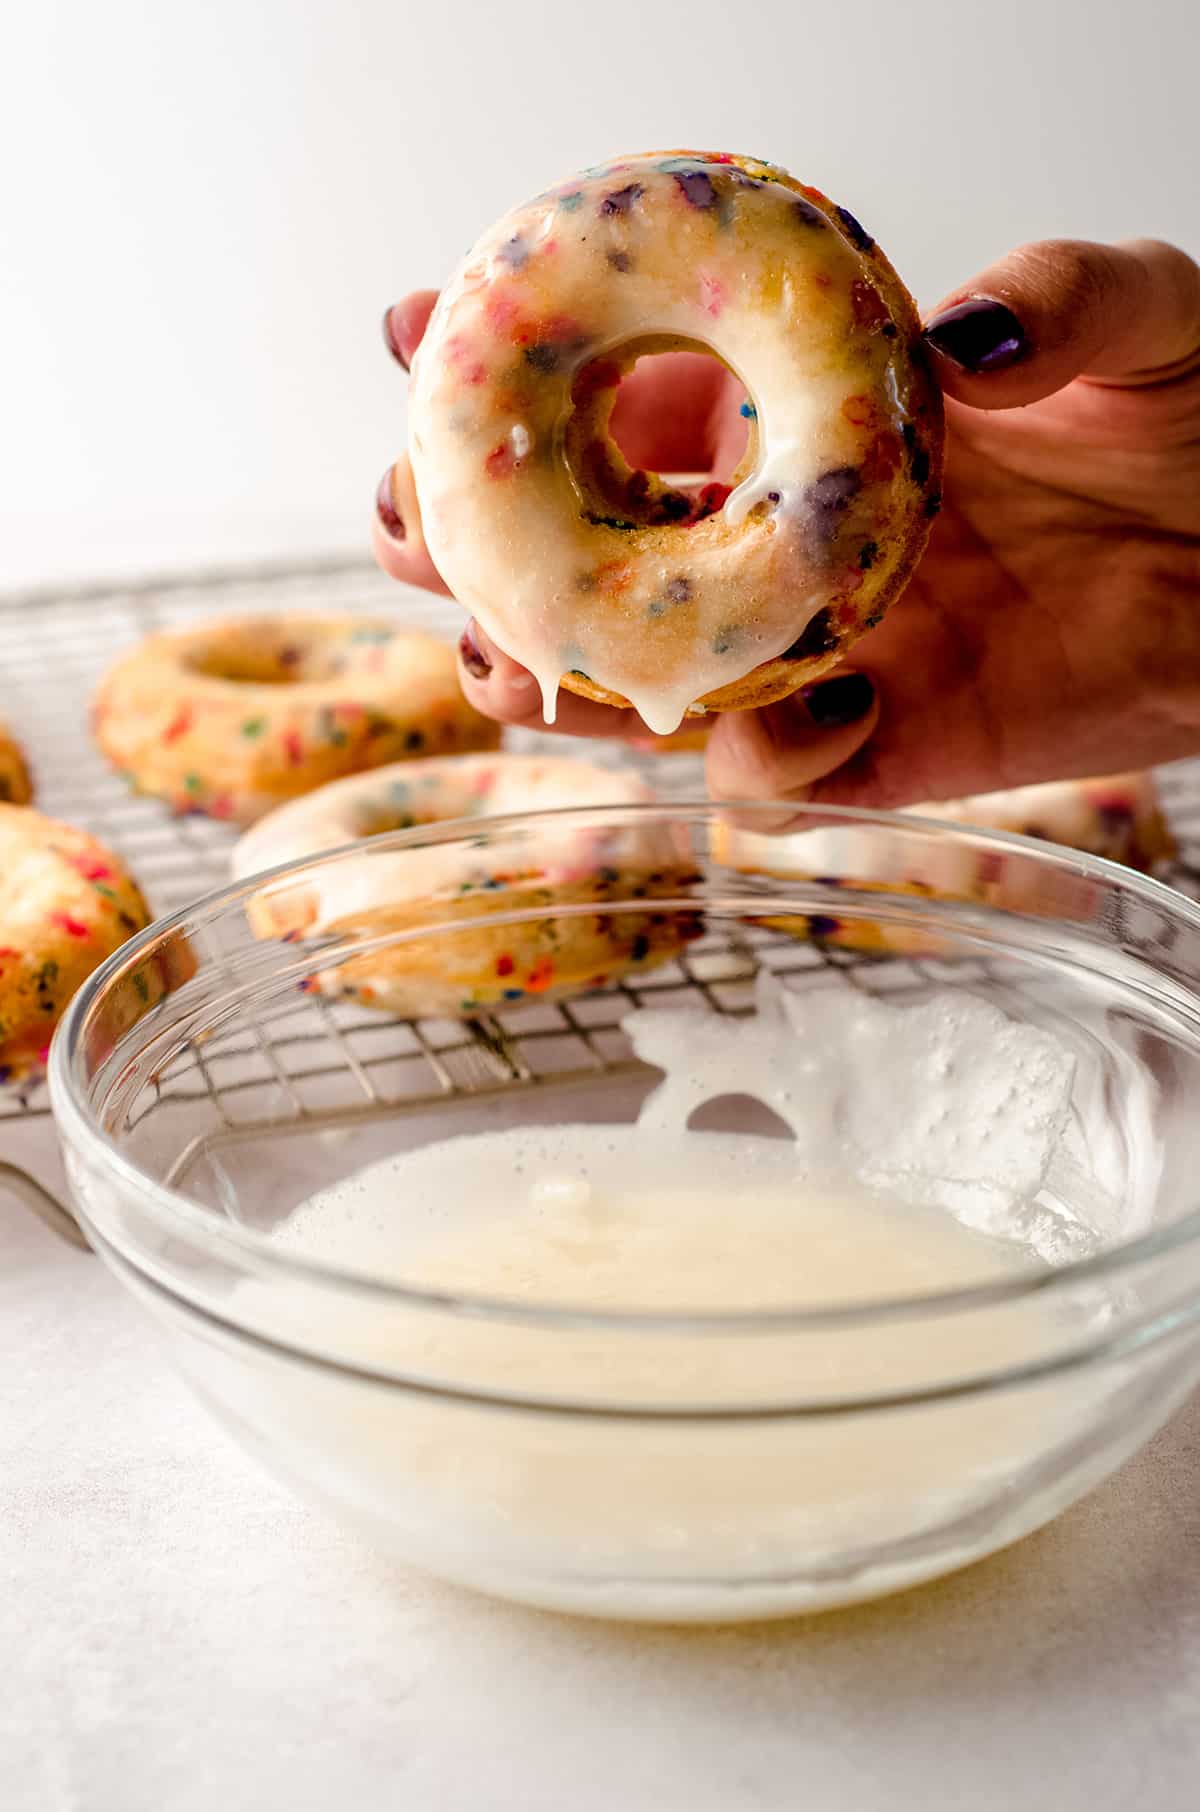 hand holding a funfetti donut after dipping it into glaze